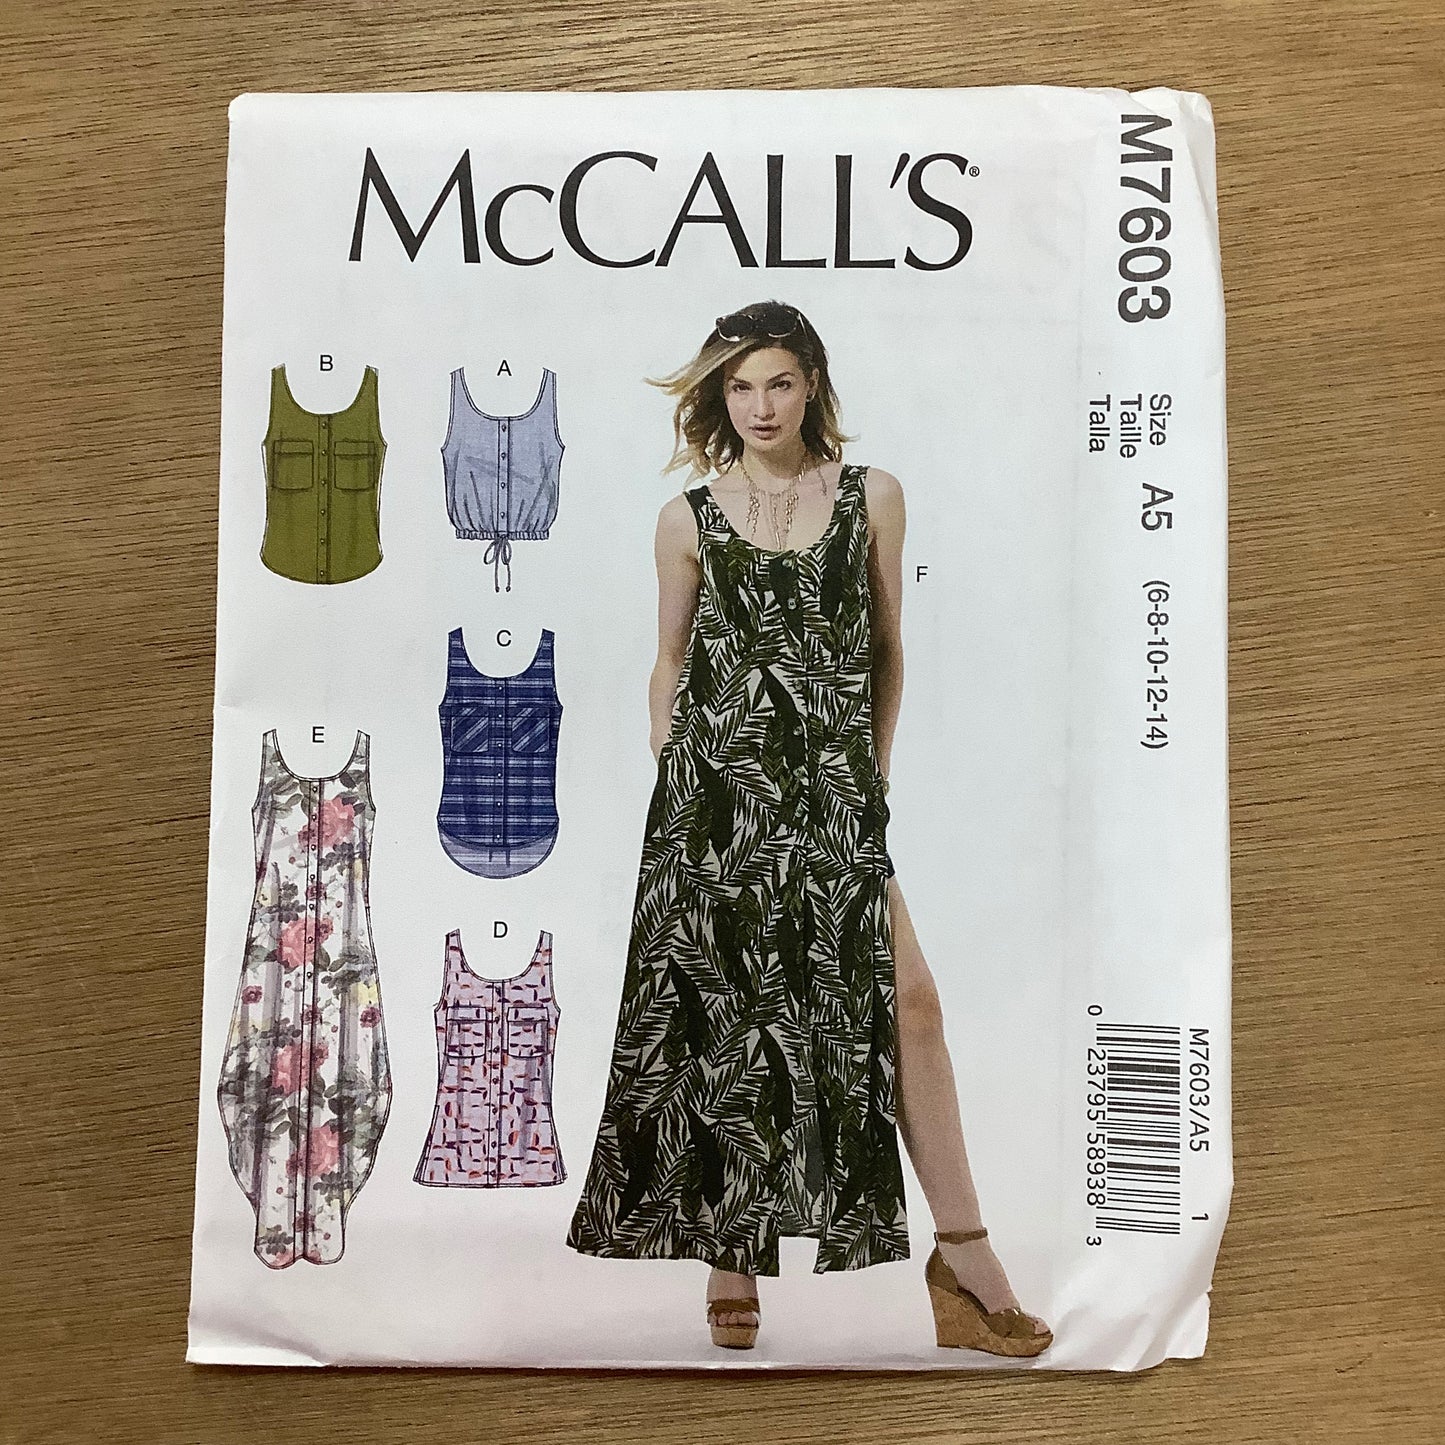 McCall's Dressmaking Sewing Pattern Women's Tops, Vests and Dresses Maxi Dress 7603